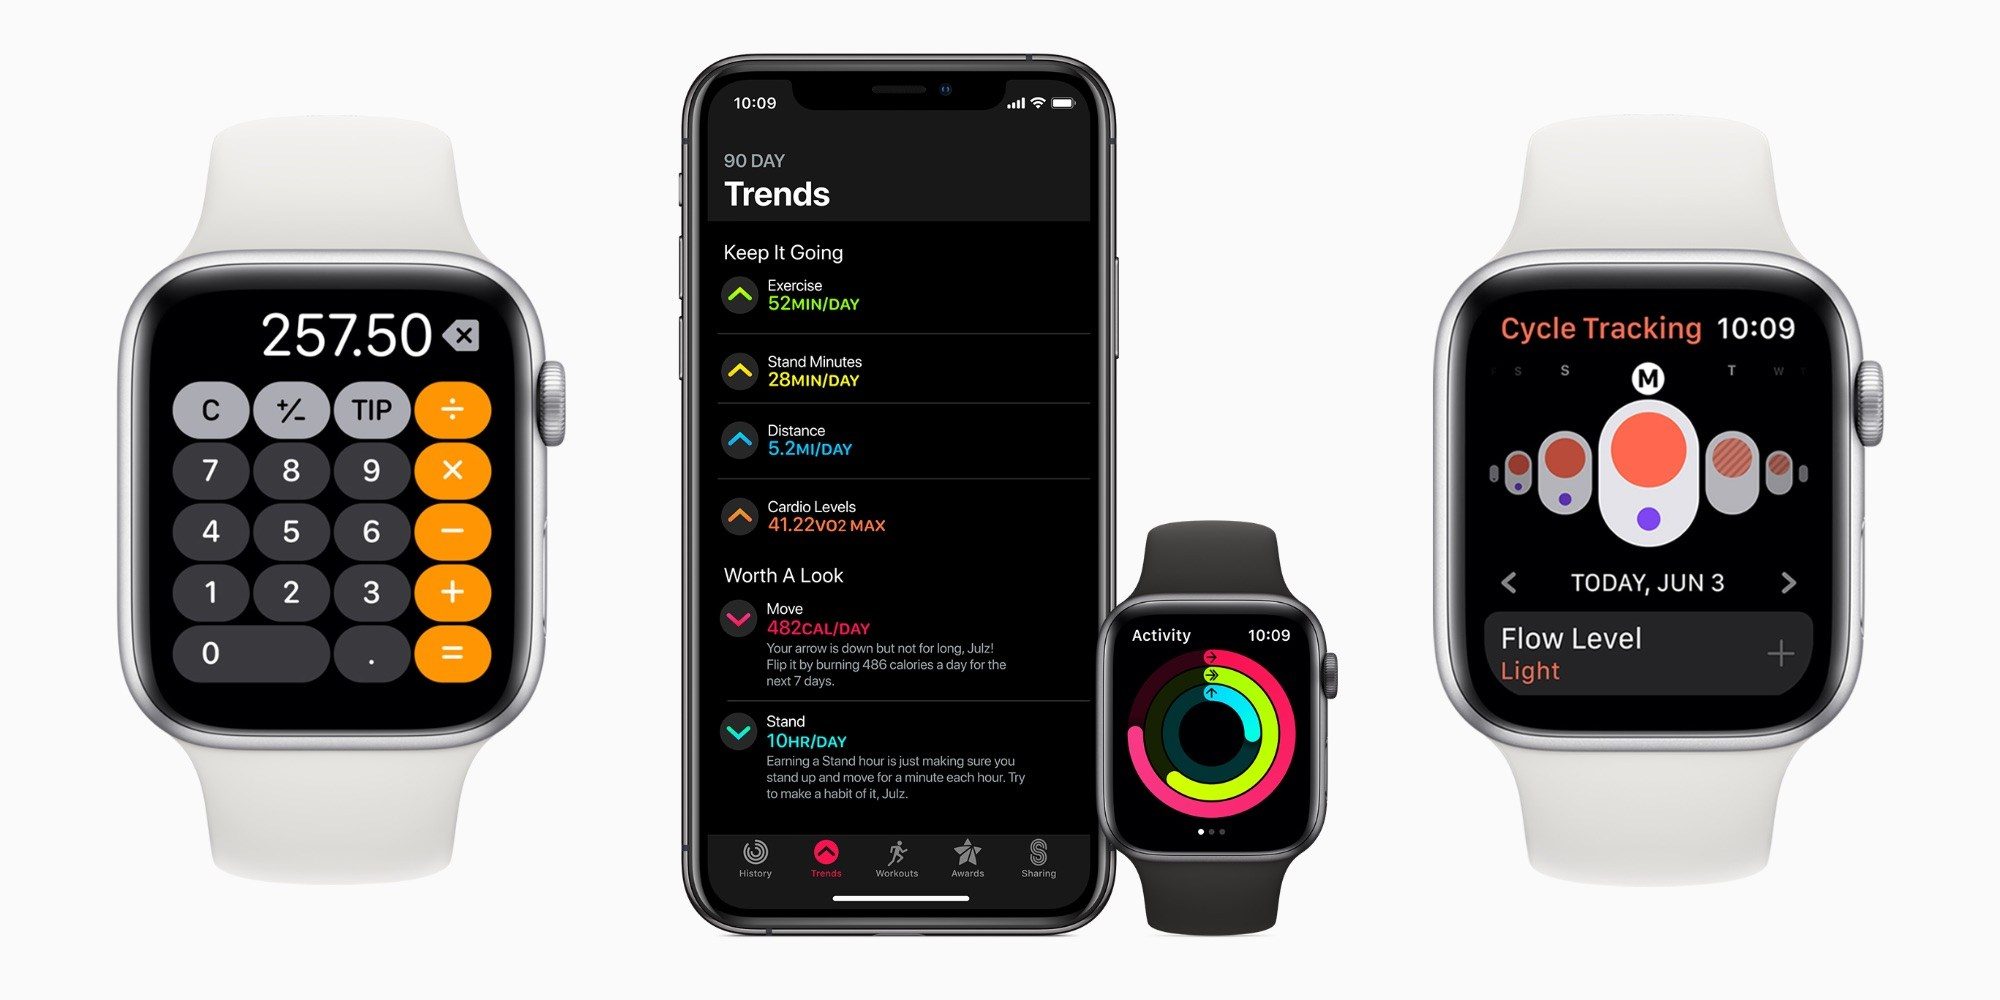 watchOS 6 Is Now Available with Top 6 New Features